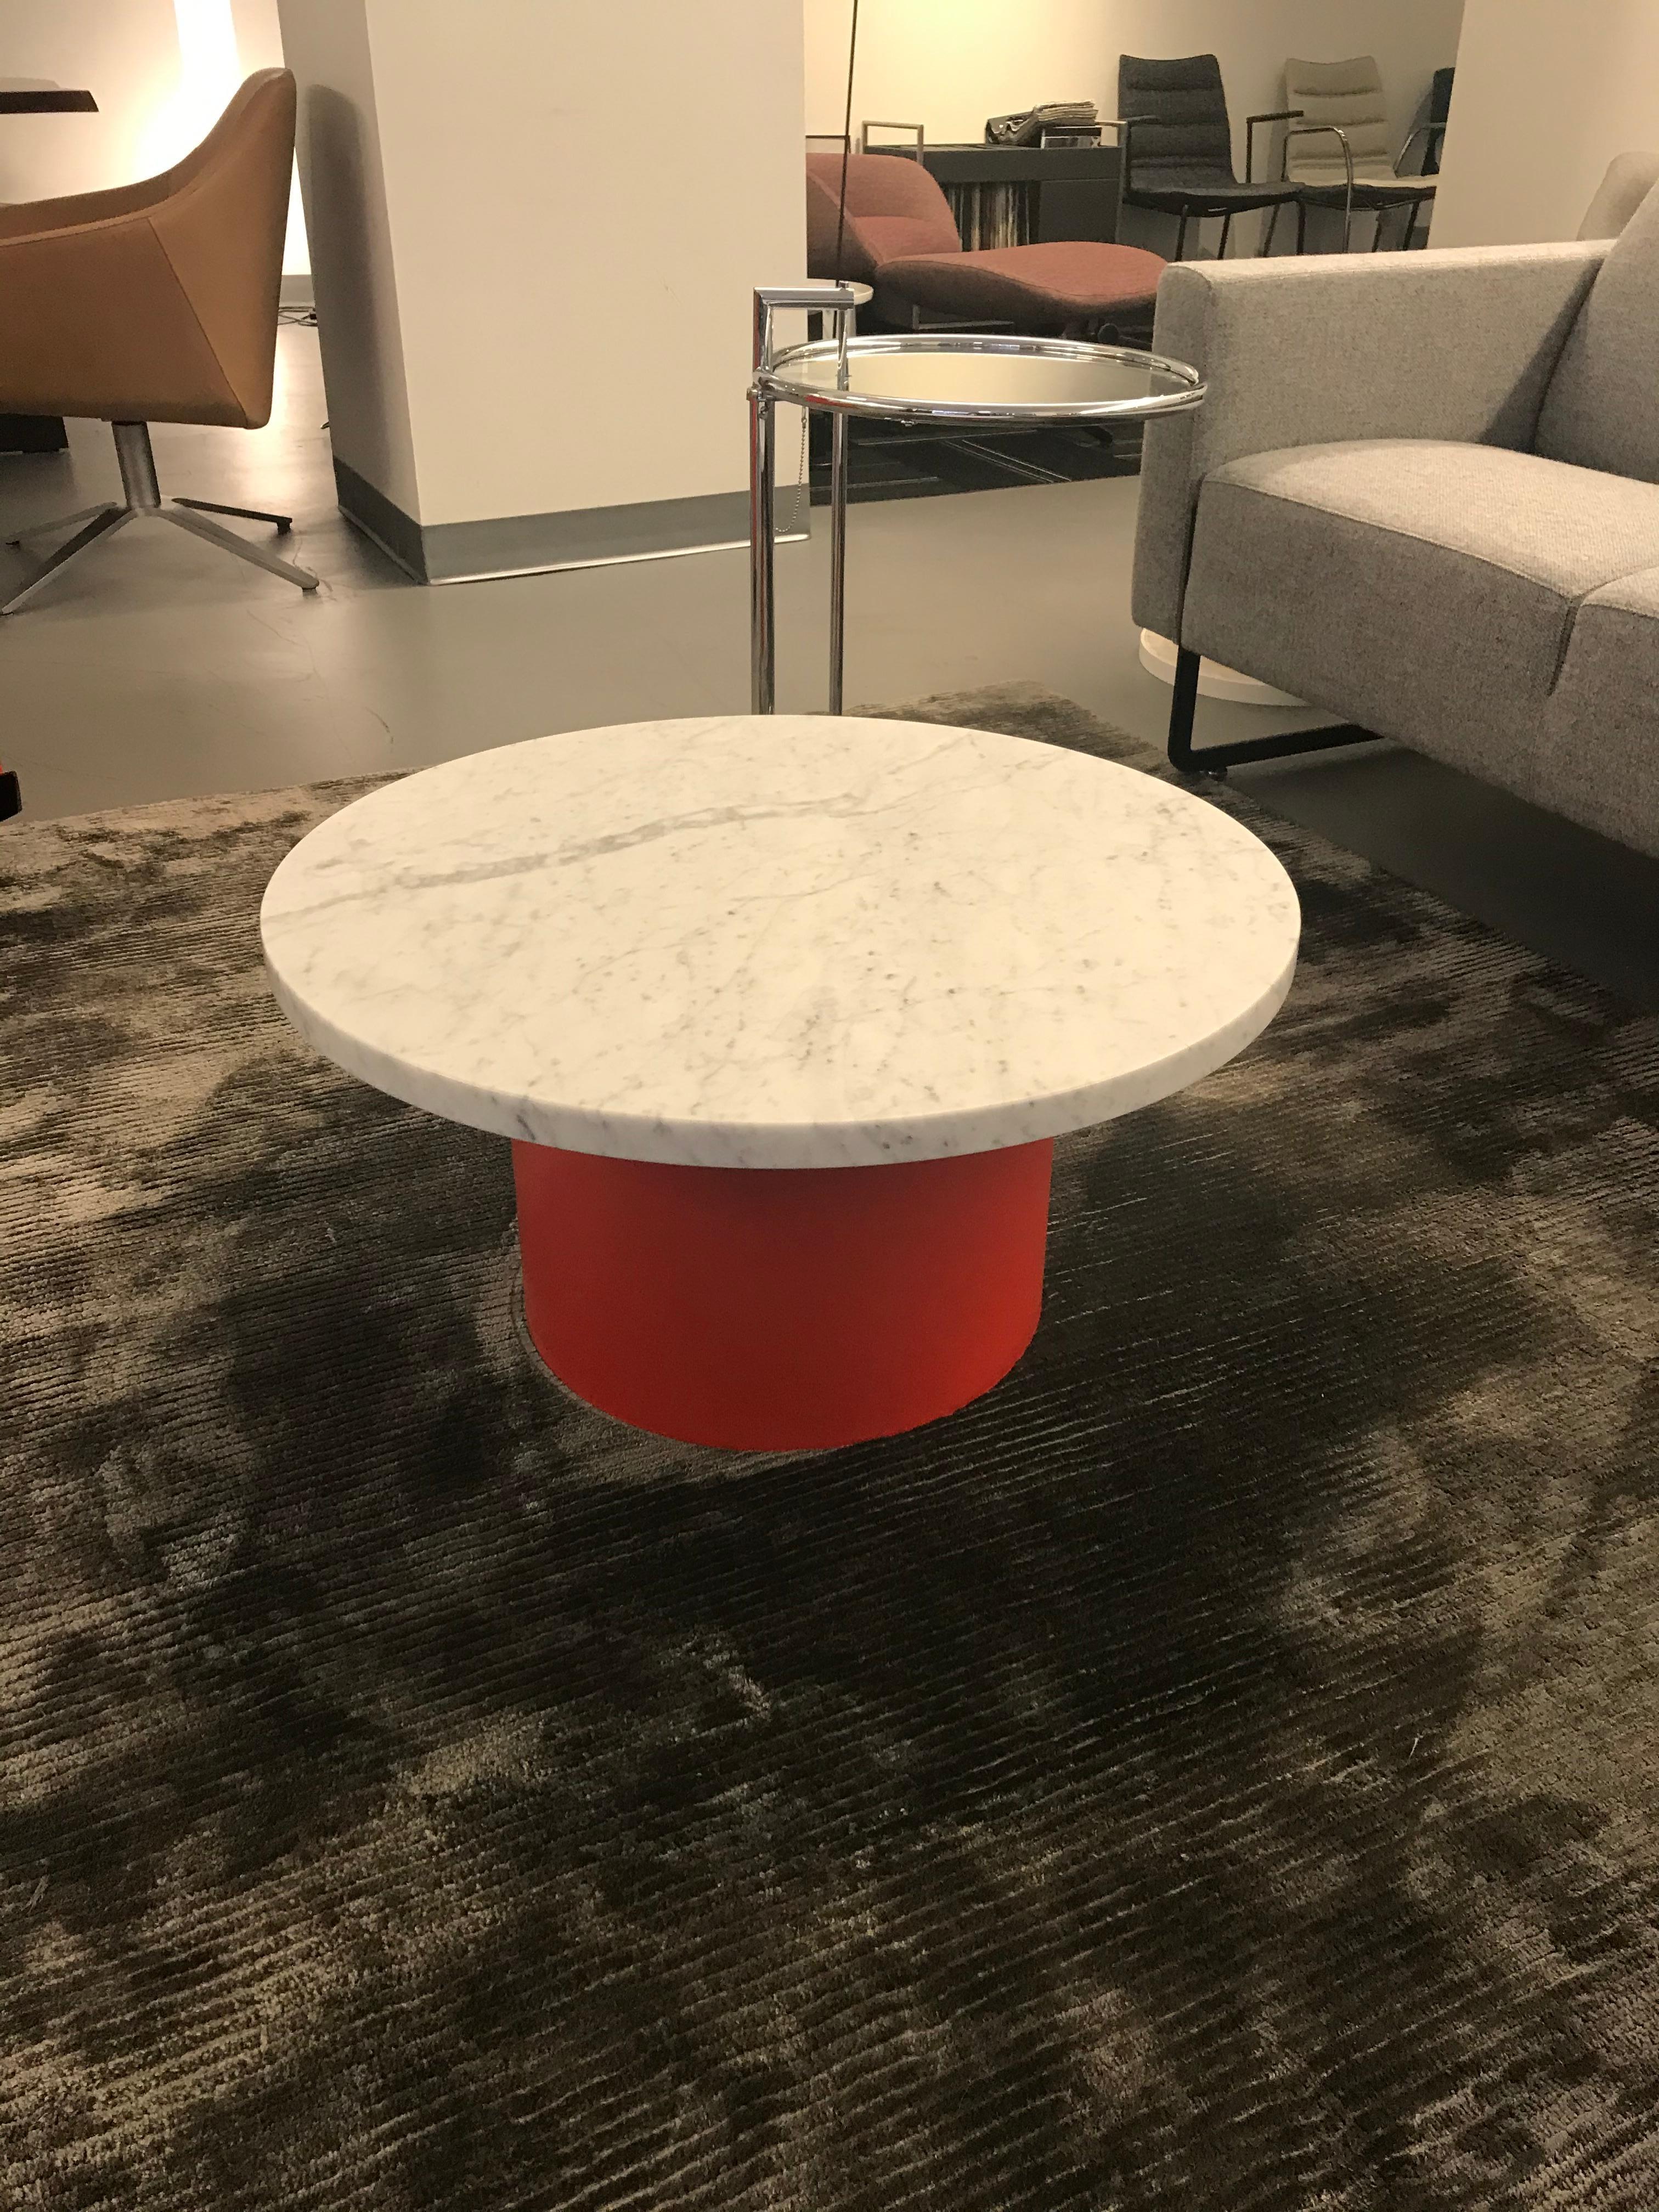 With the smart and playful side table ENOKI, e15 introduces marble for the collection, applying it to novel form. Cleverly toying with material, color and dimensions, the versatile side table presents a combinations of rich marble and solid wood and